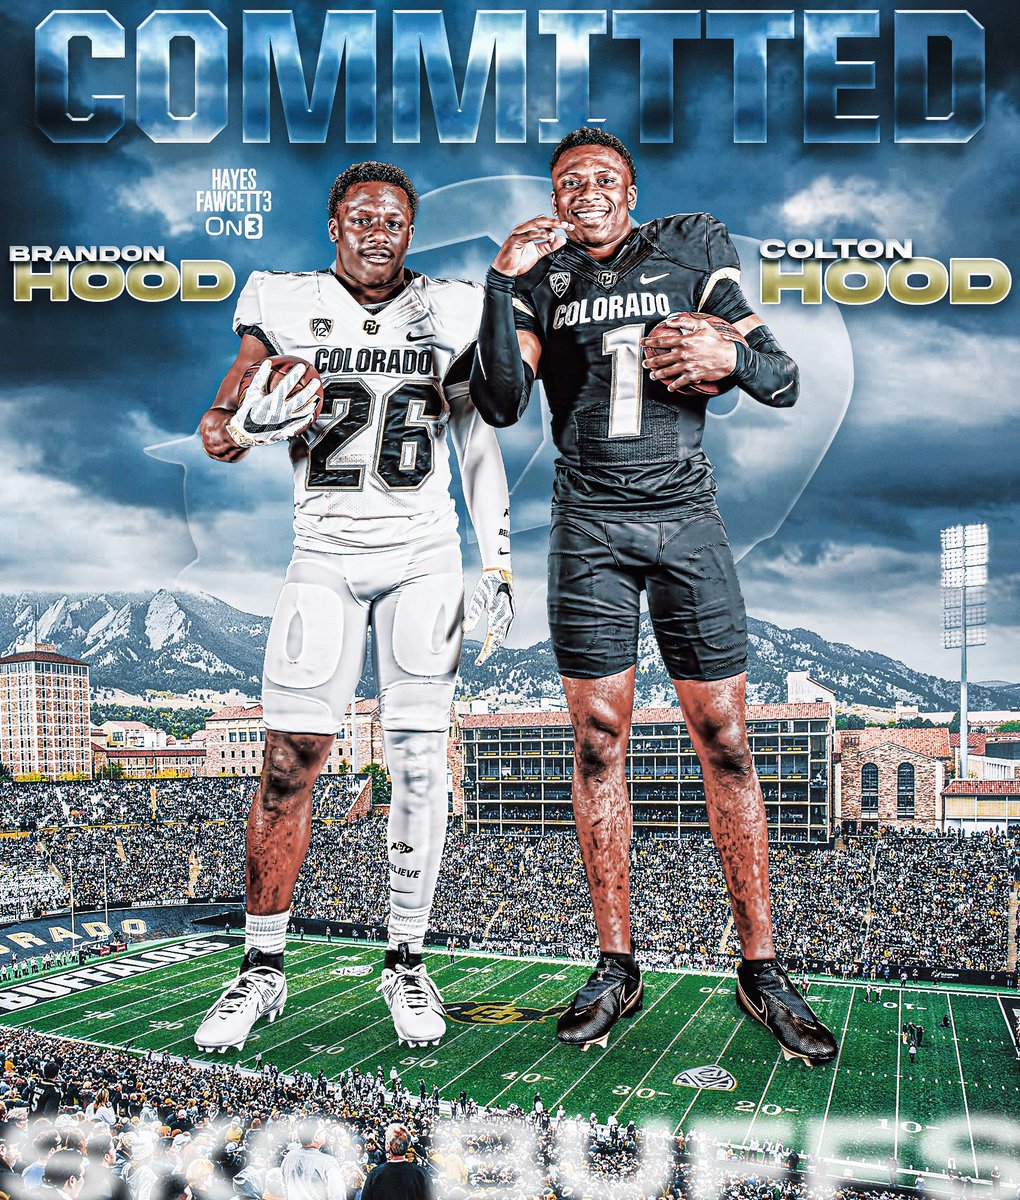 BREAKING: Former Auburn CB Colton Hood and 2024 RB Brandon Hood have Committed to Colorado, they tell @on3sports Colton, a 6’0 195 CB, will have all 4 years of eligibility remaining Brandon, a 5’11 190 RB, held offers from LSU, Tennessee, Auburn, & others…